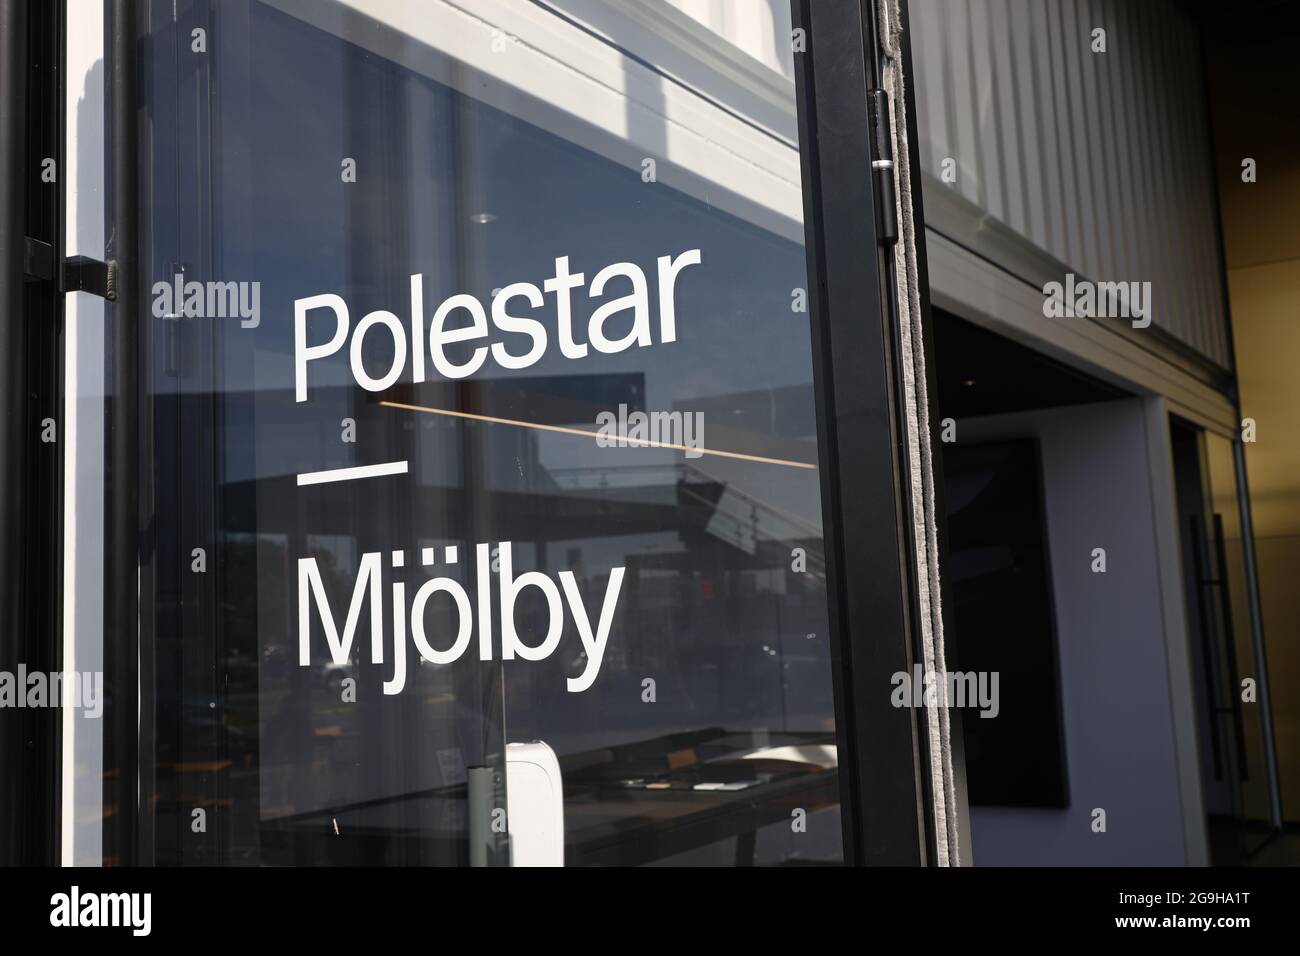 During July, August and September, Volvo Cars and the sister brand Polestar will offer free fast charging for all electric cars in Mjölby. A Polestar sign at the area. Stock Photo